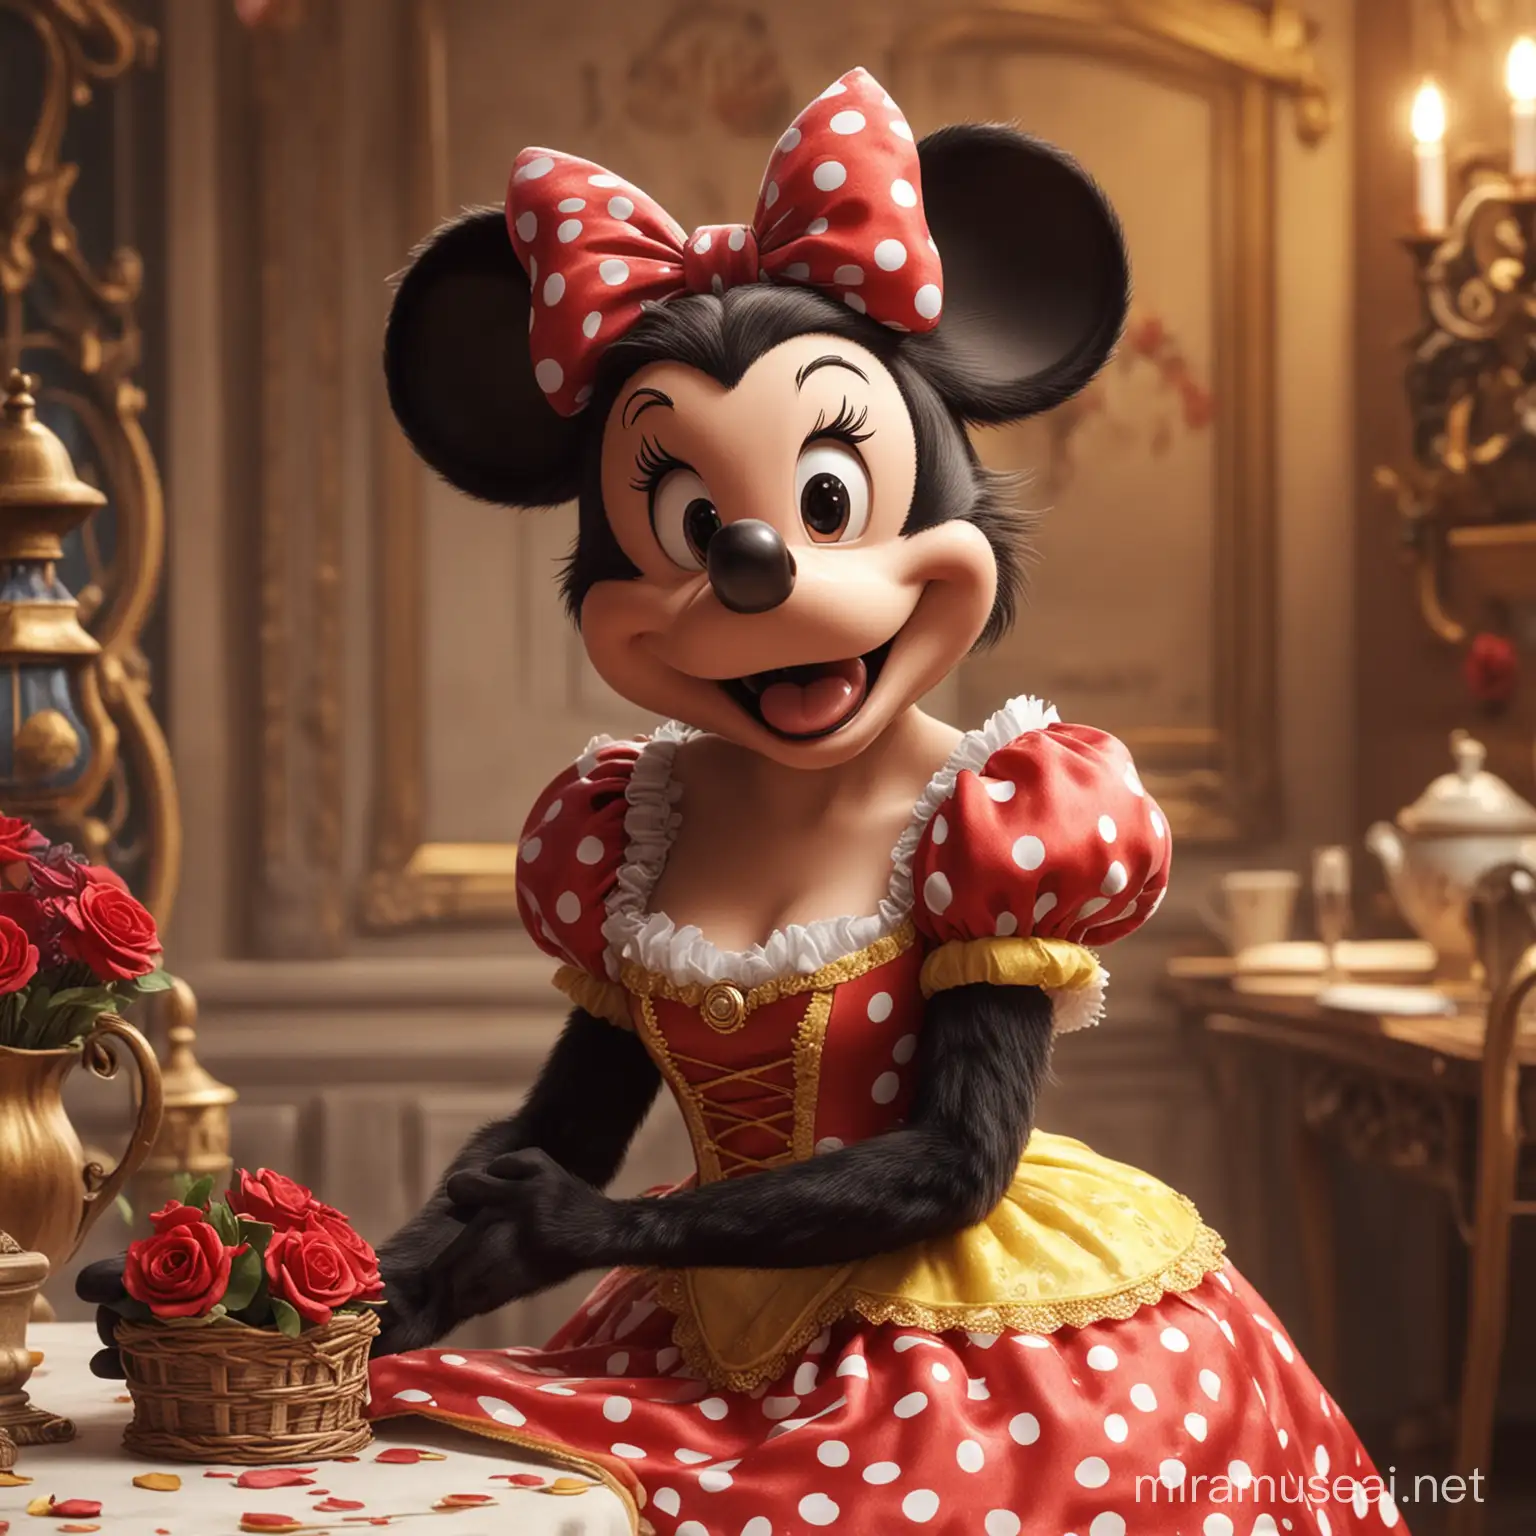 Cheerful and Realistic Minnie Mouse Inspired by Beauty and the Beast